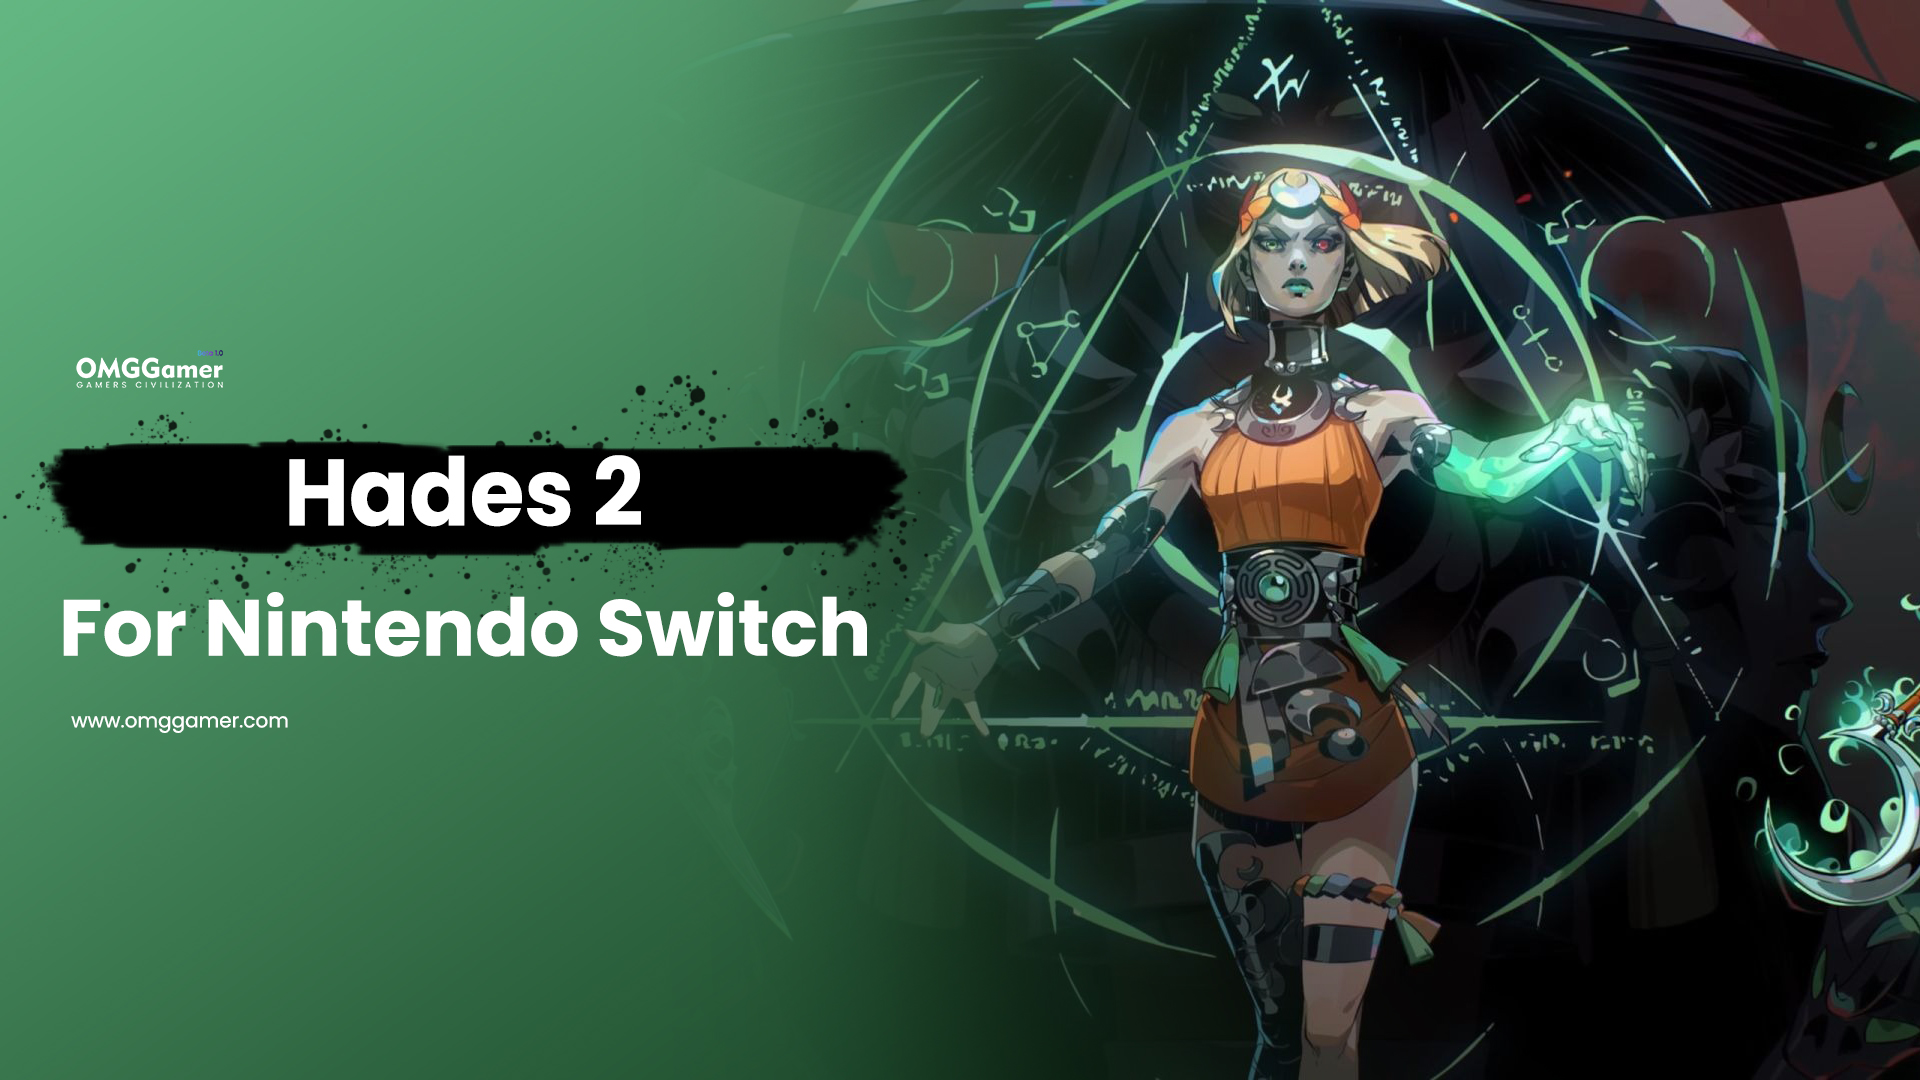 Hades 2 for Nintendo Switch